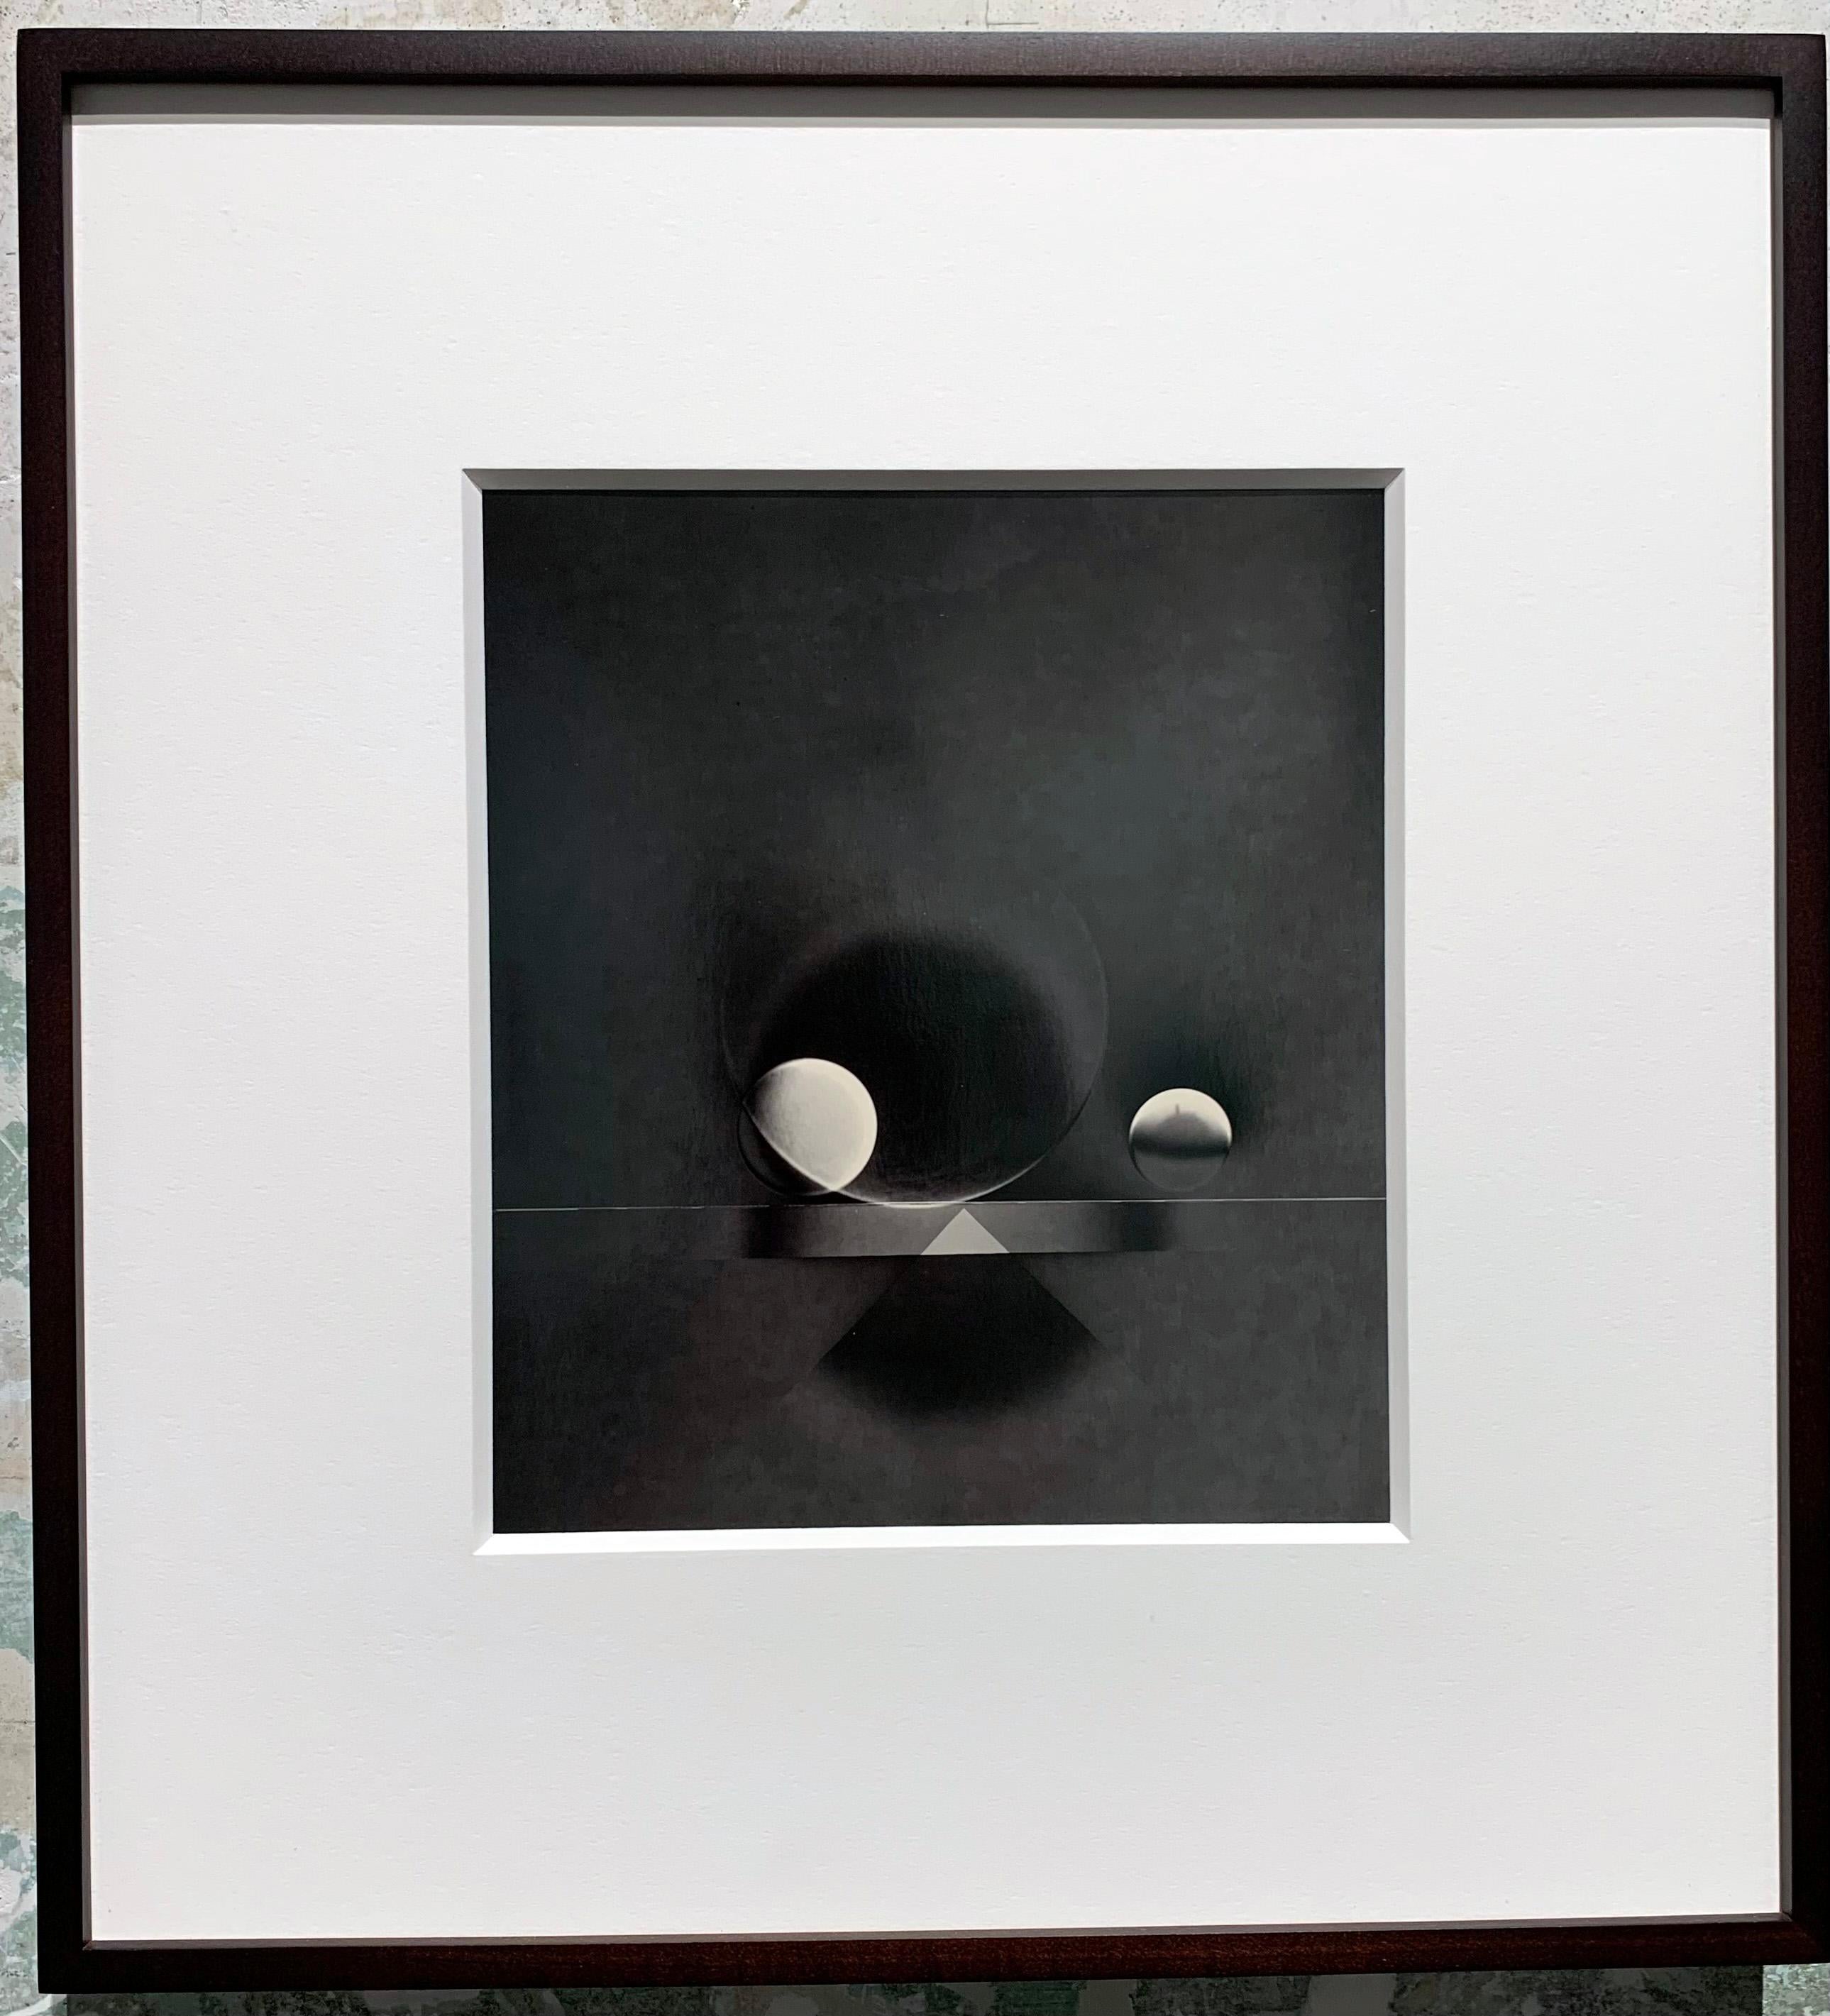 ATO>MIC #13, Unique Silver Luminogram Print, Two spheres and triangle with shade - Black Abstract Print by Michael G Jackson 